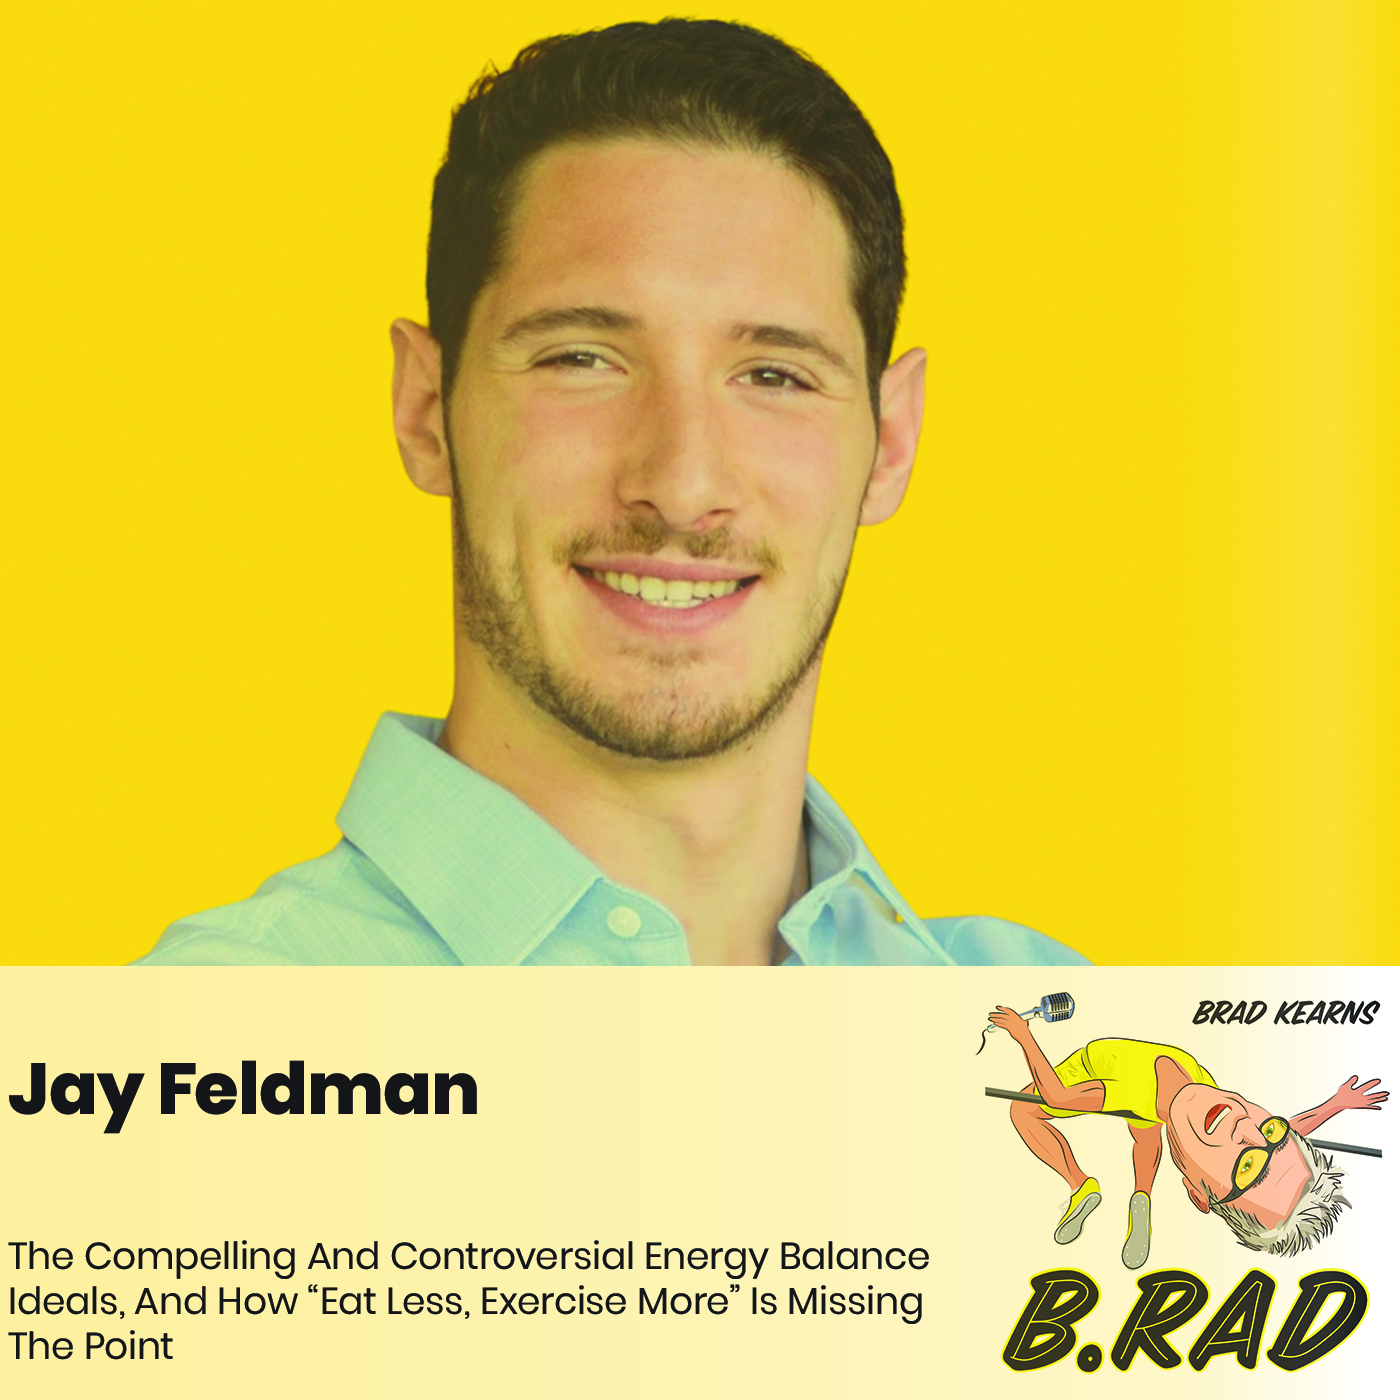 Jay Feldman: The Compelling And Controversial Energy Balance Ideals, And How “Eat Less, Exercise More” Is Missing The Point